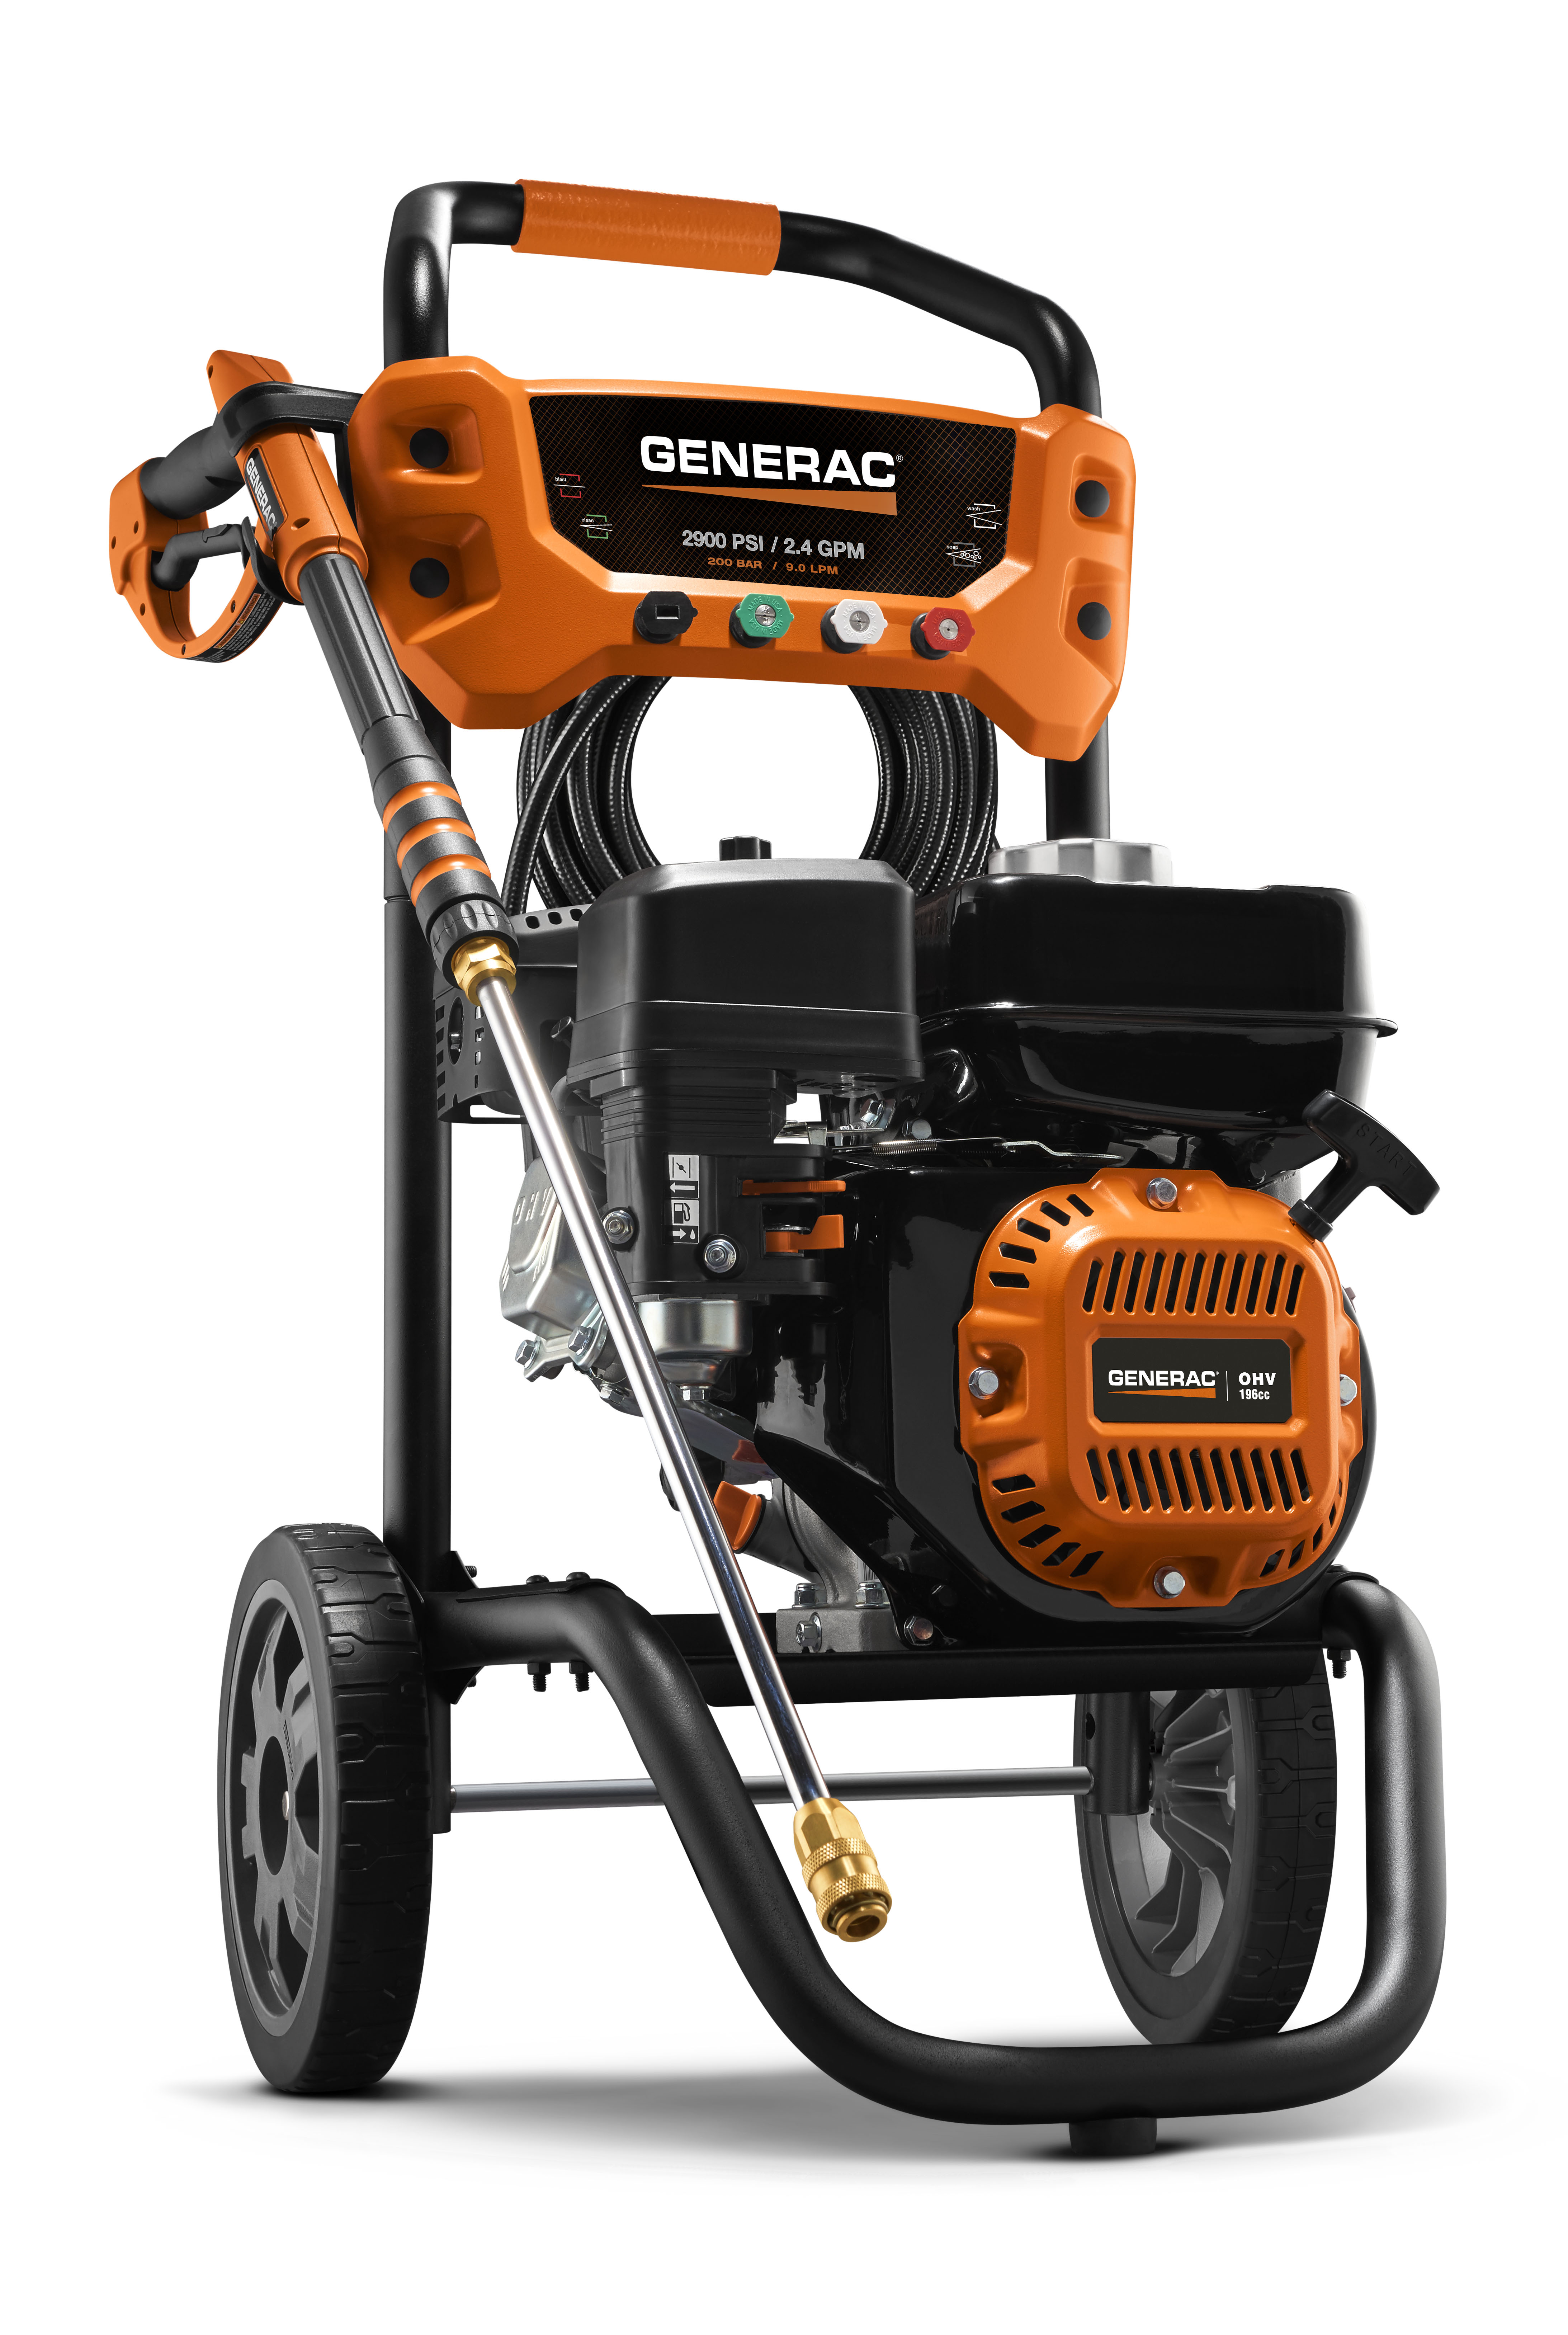 Pressure Washer 2900PSI 2.4GPM Product Image